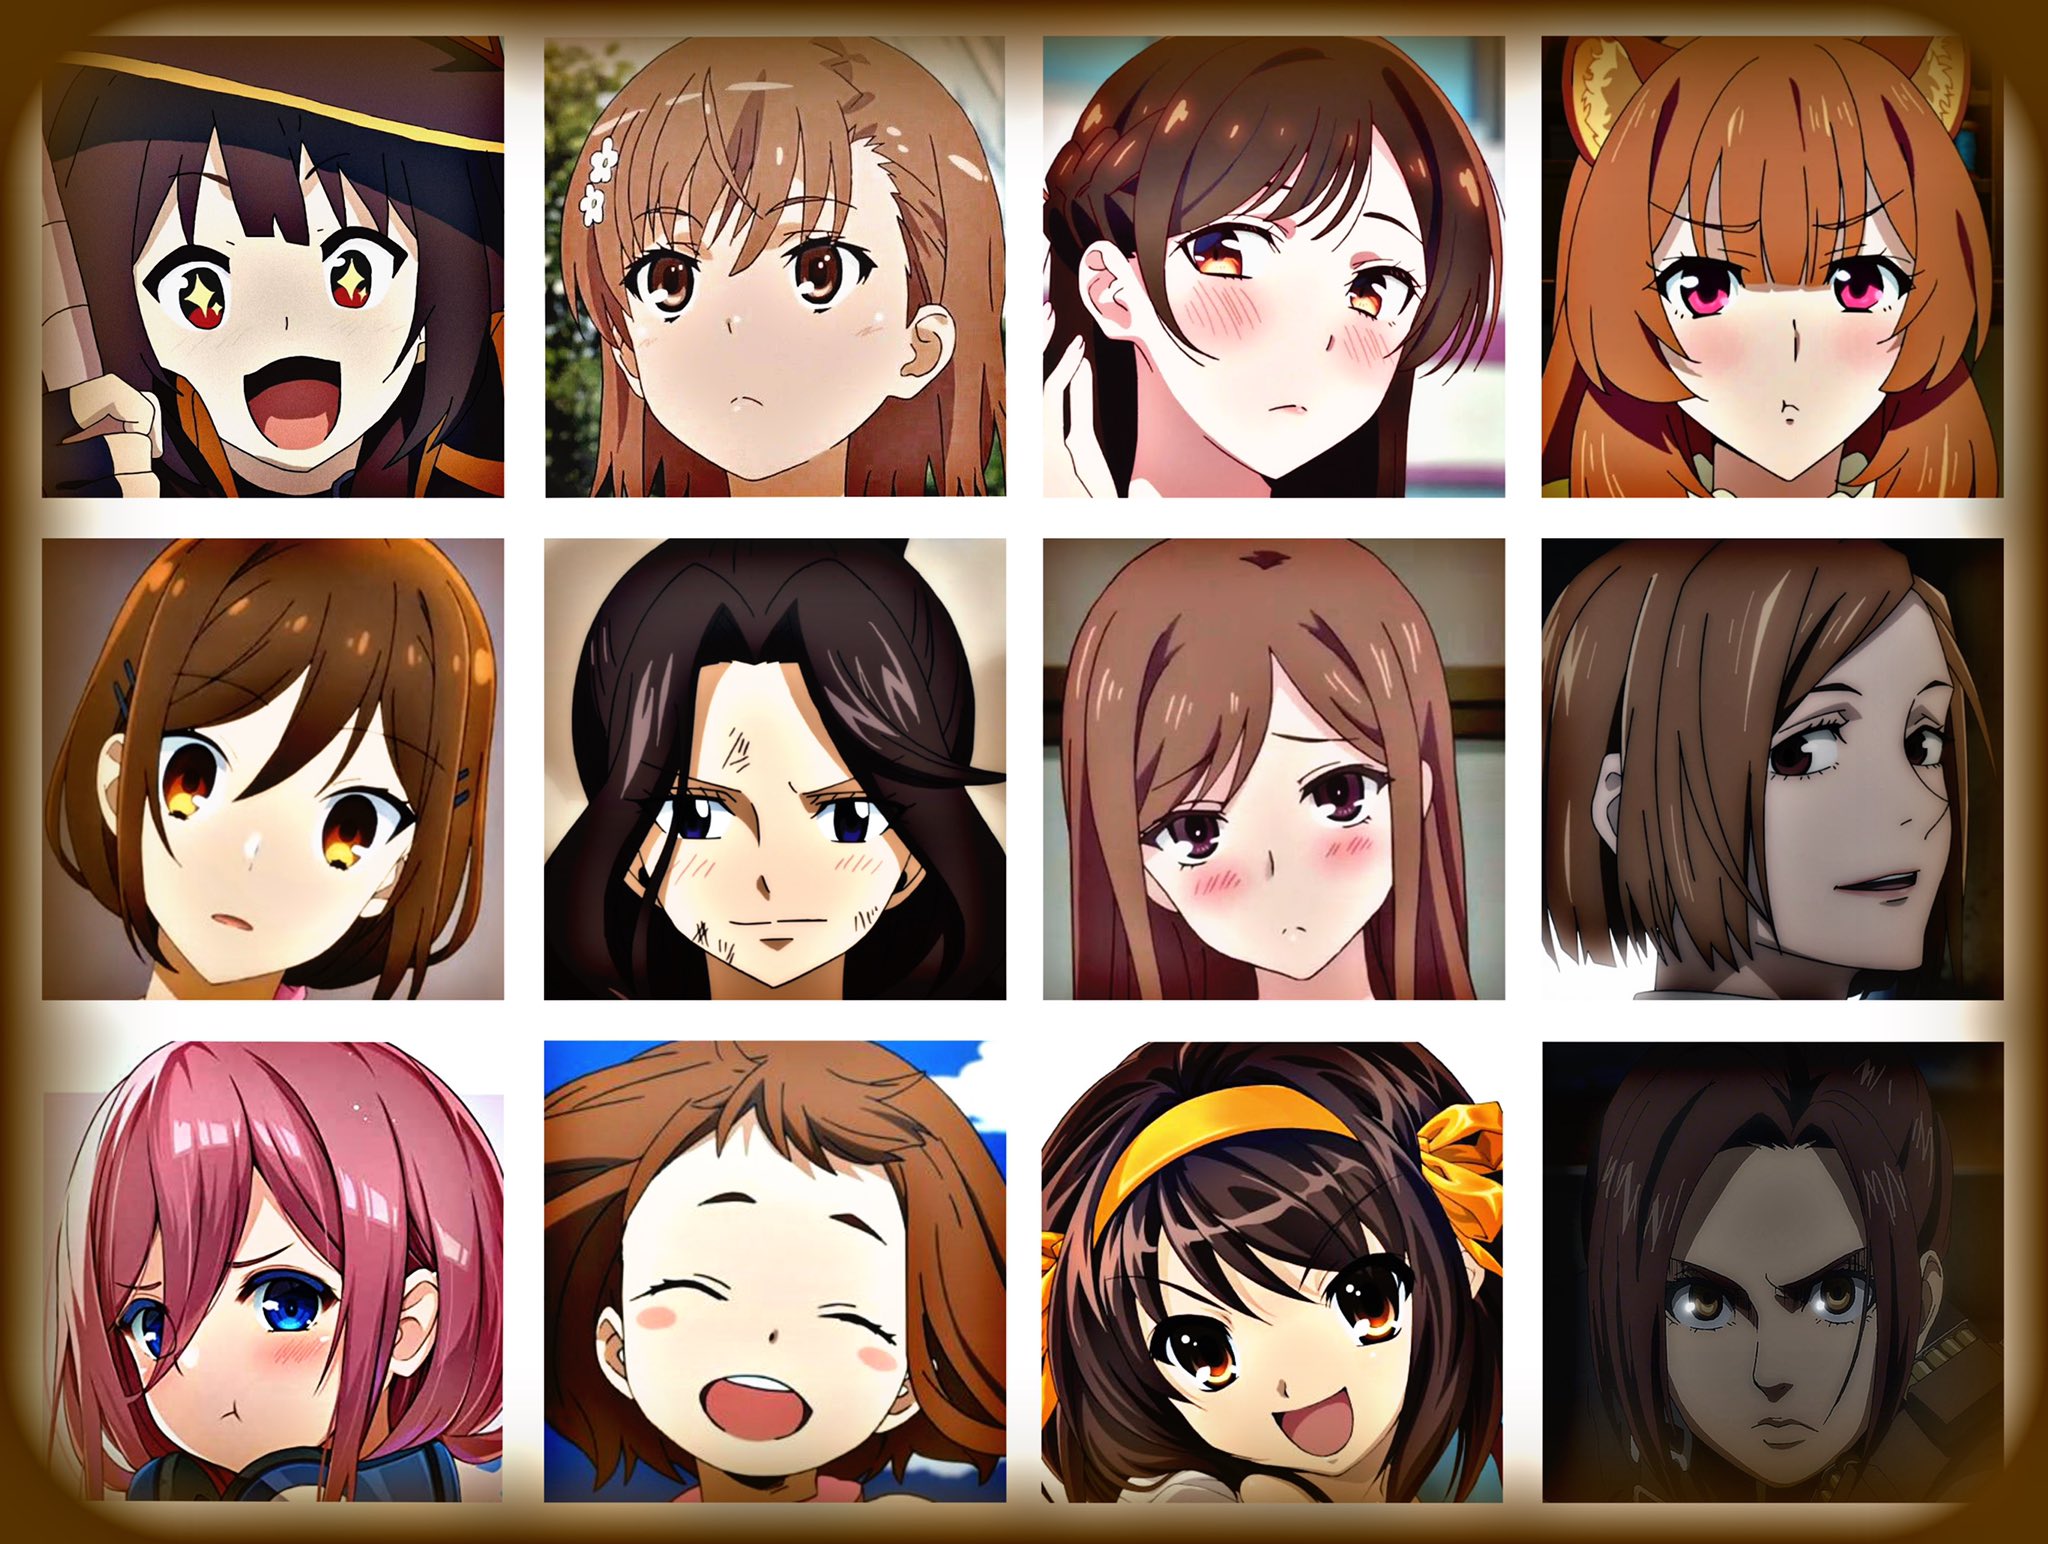 List of Top Brown Hair Anime Characters